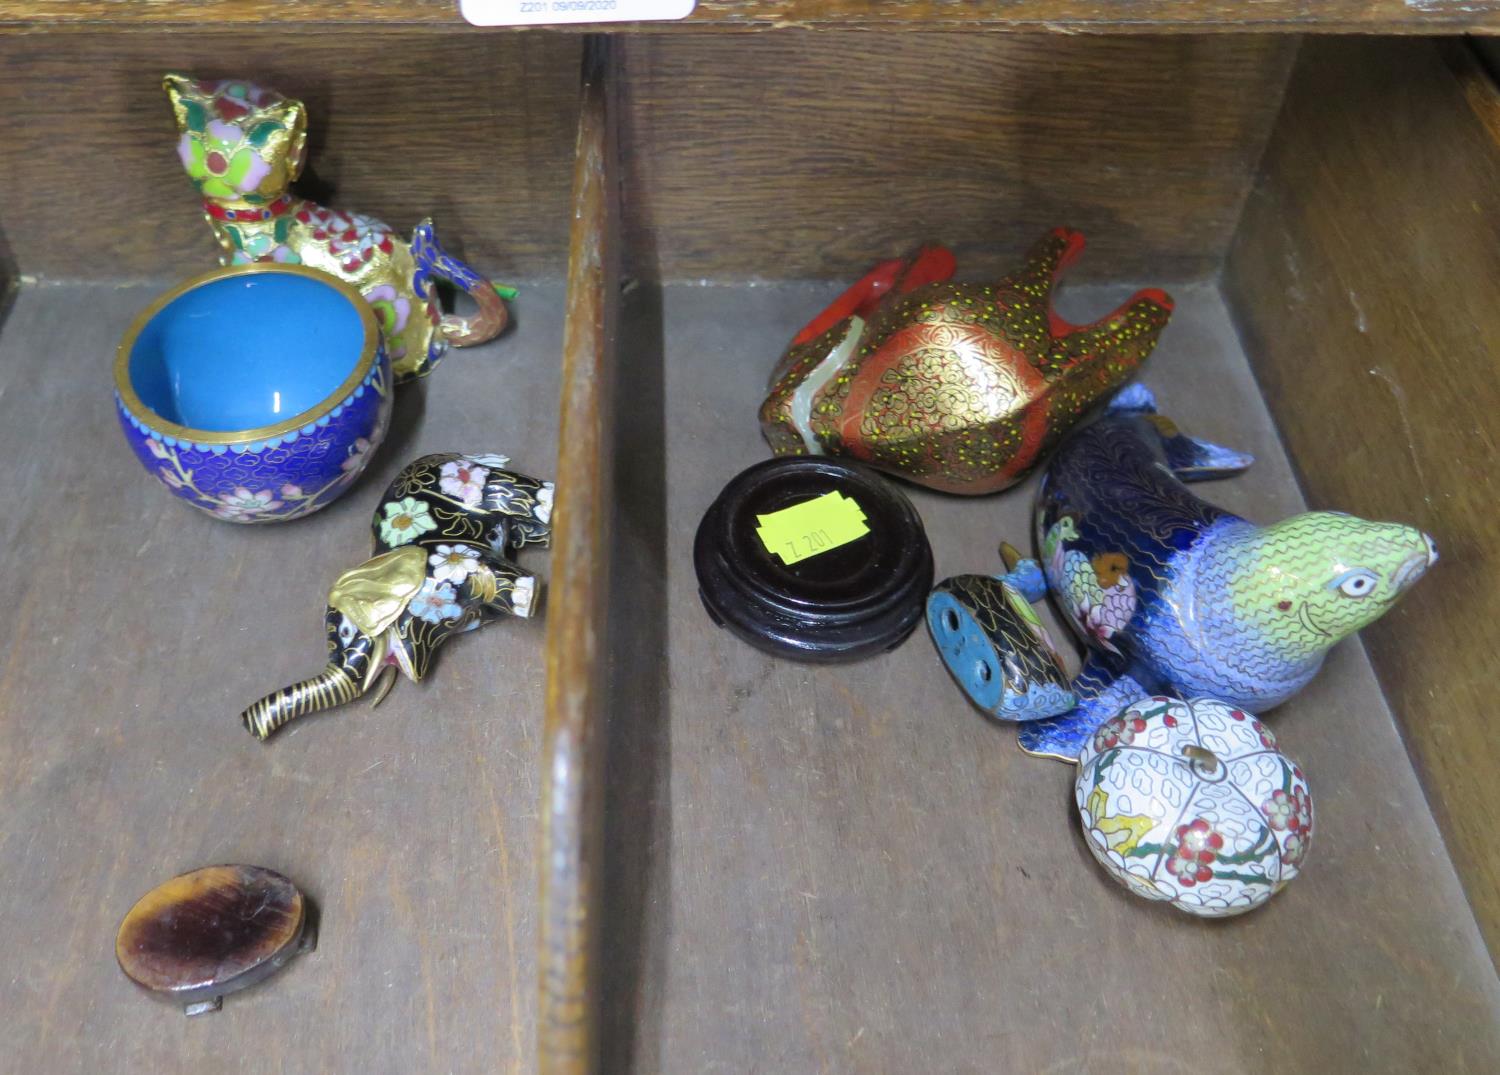 Seven pieces of cloisonne including animal figures and other ornaments